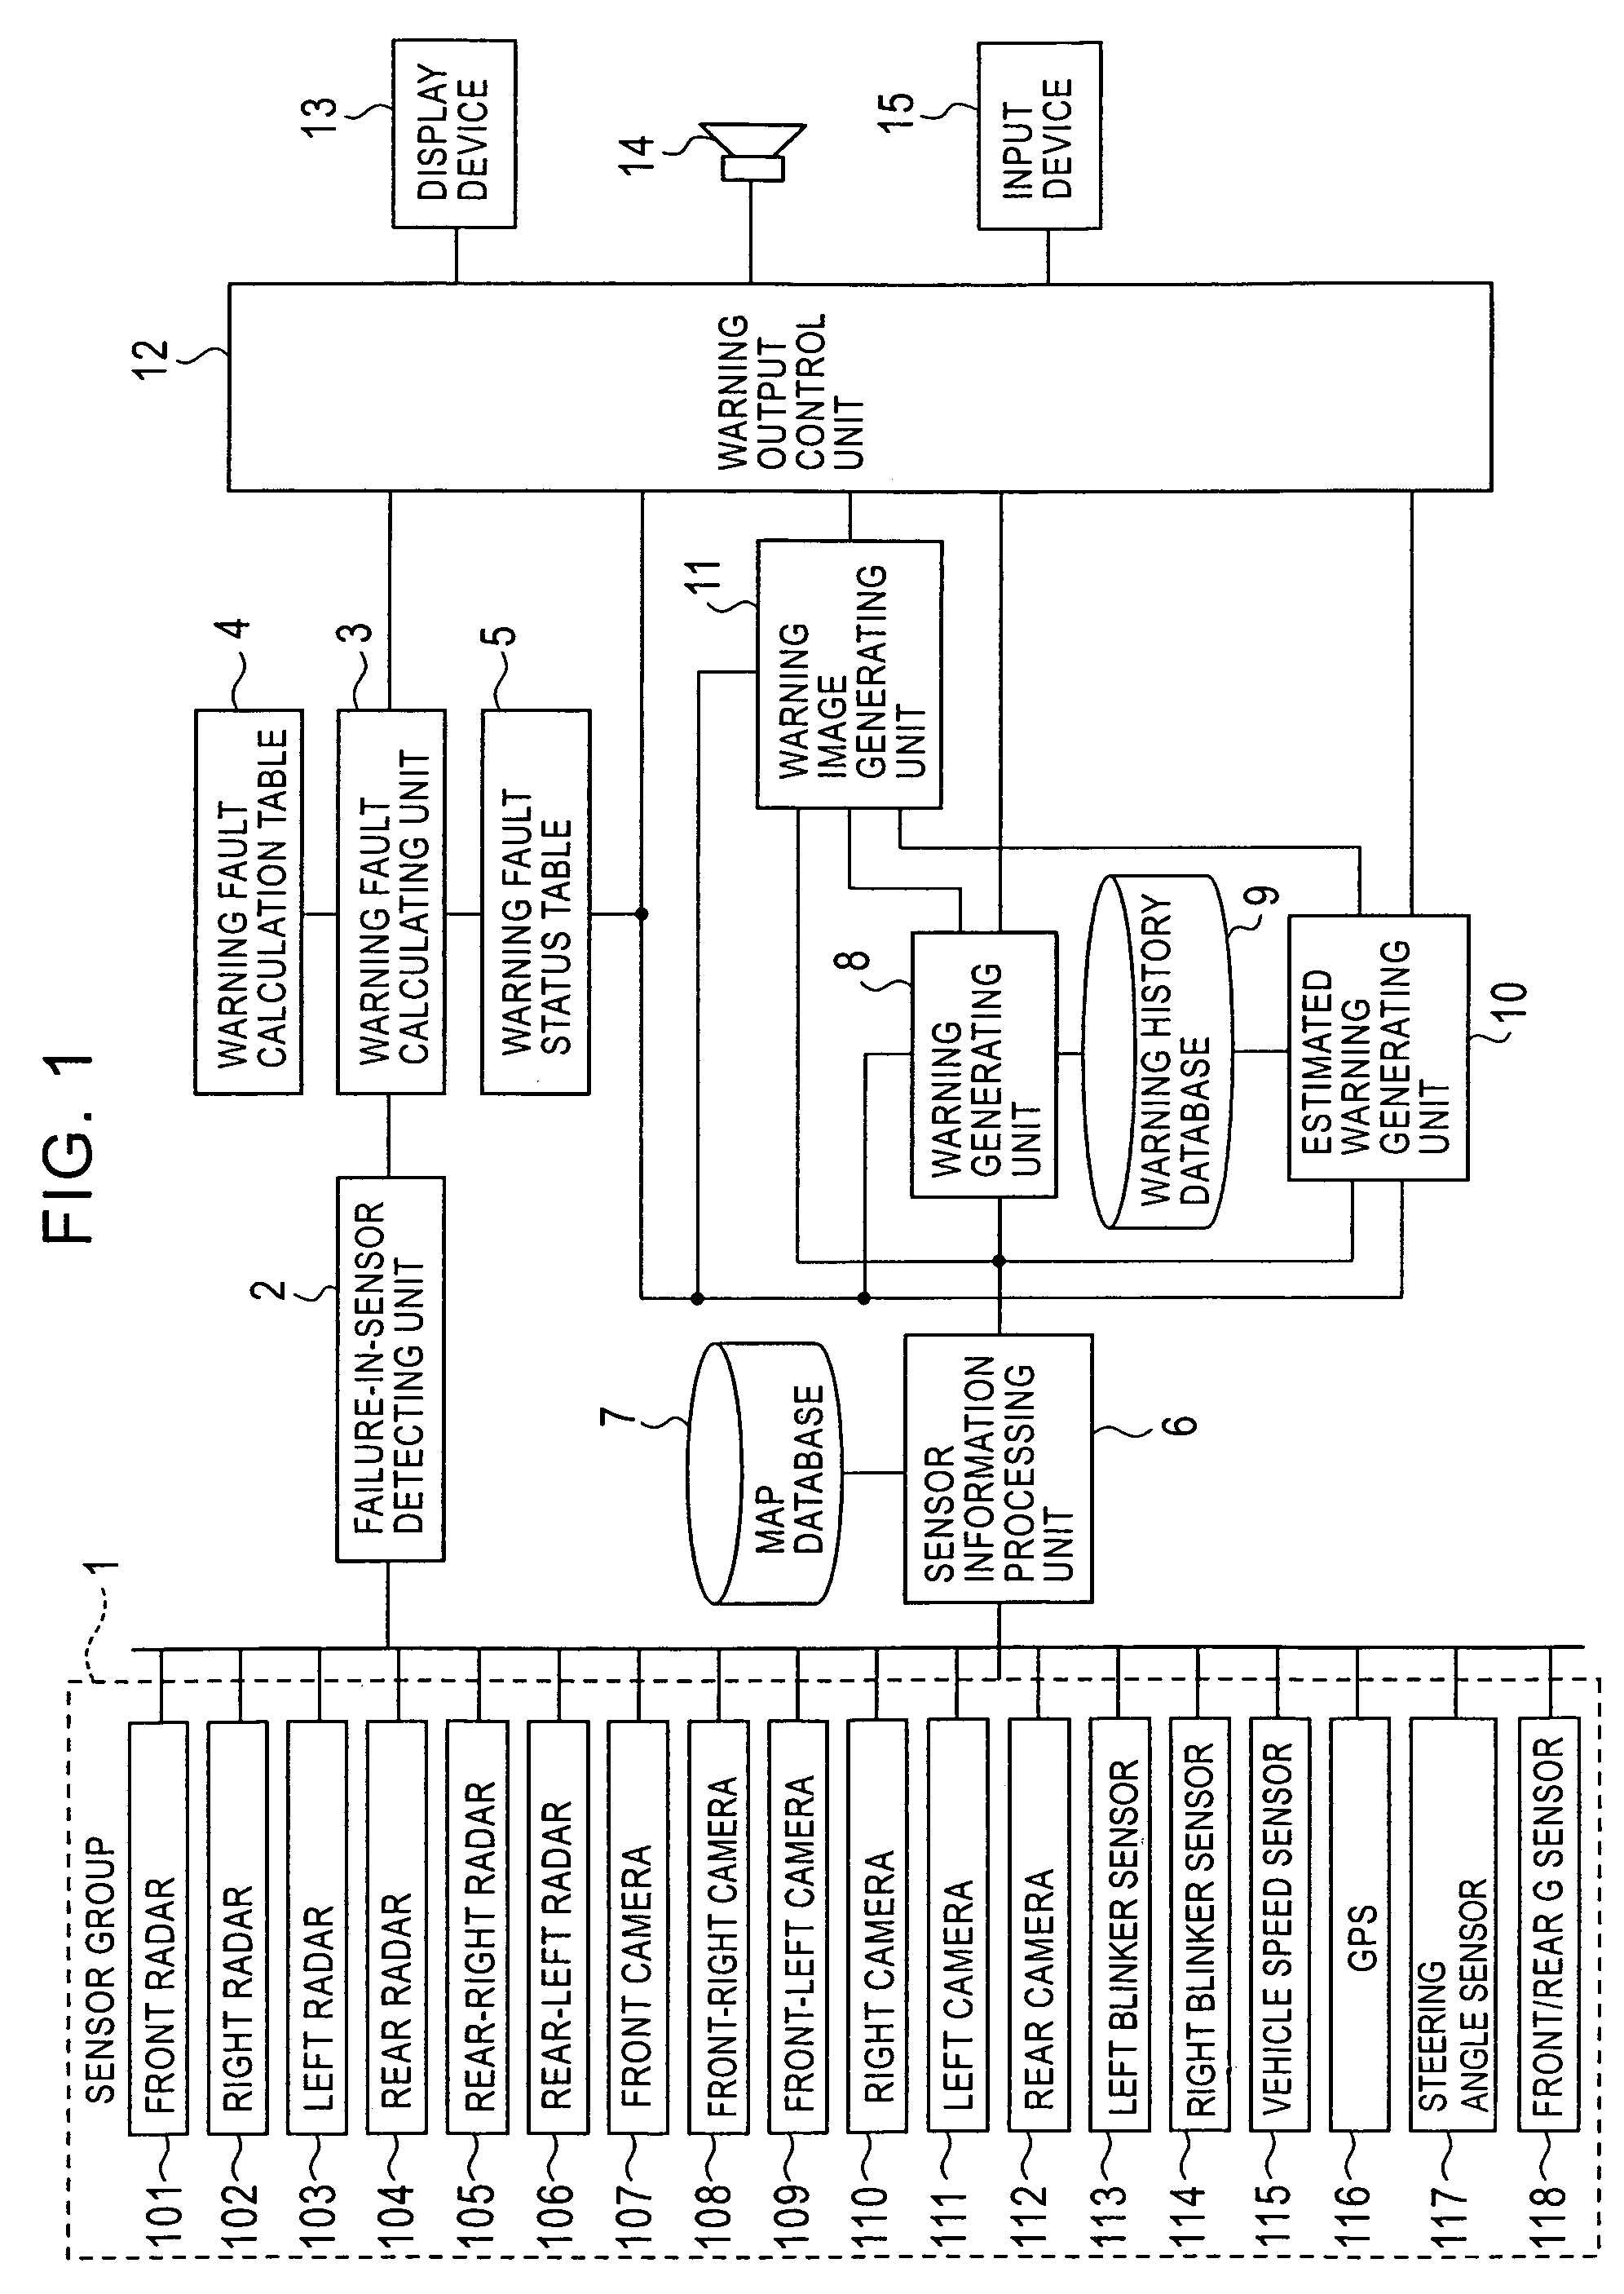 Apparatus providing information of a vehicle's surroundings